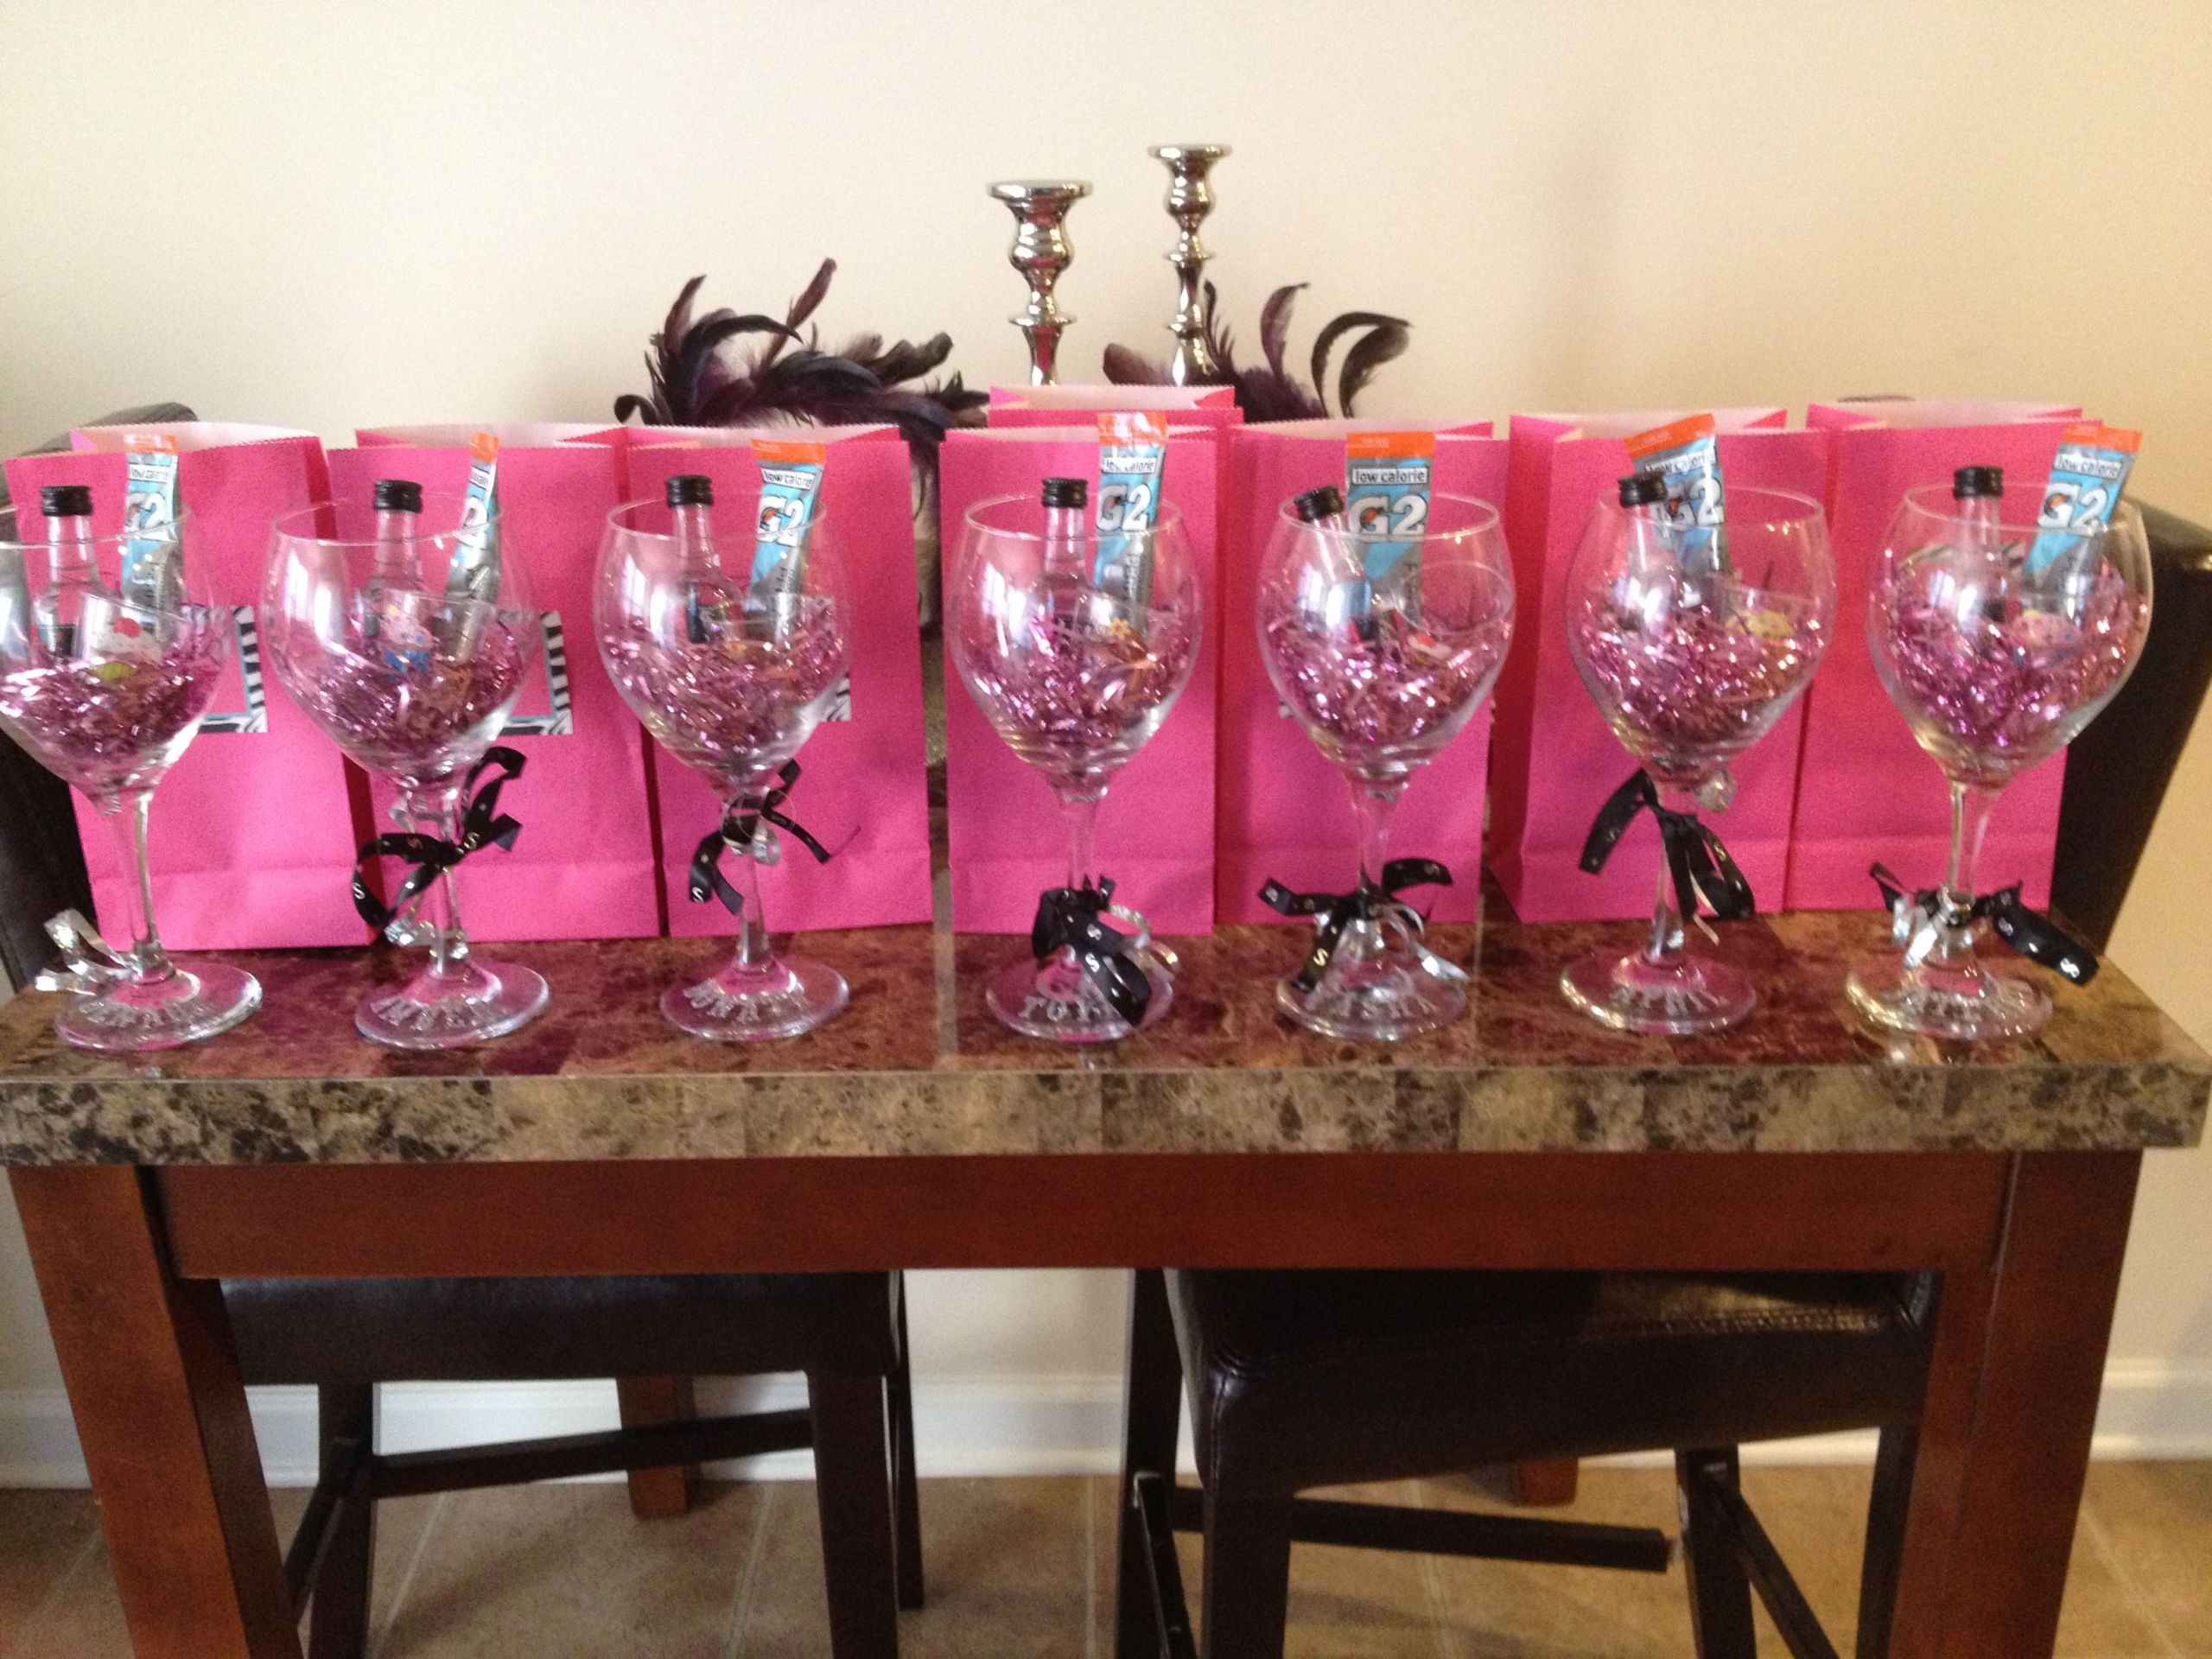 Girls Trip Gift Ideas
 Girls Trip Gifts A wine glass with shot bottles and a